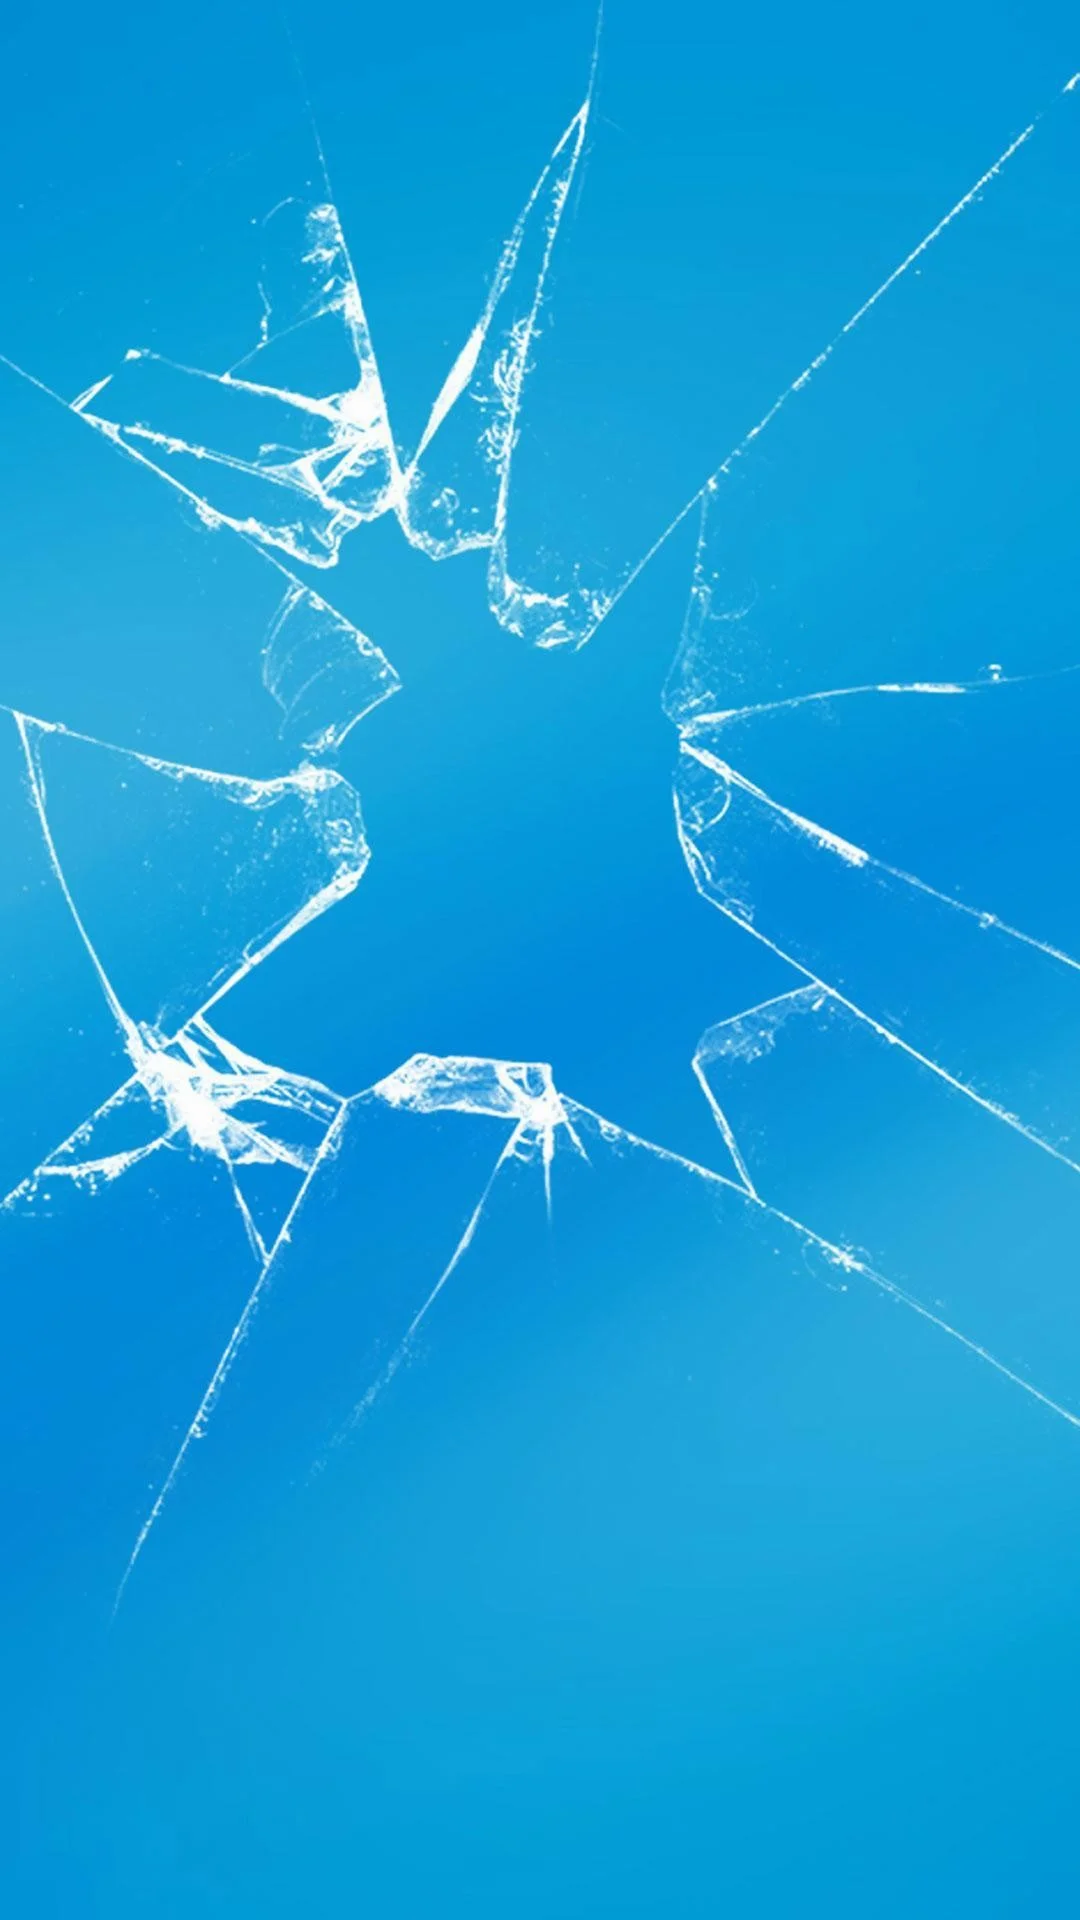 Cracked Screen Wallpaper APK for Android Download